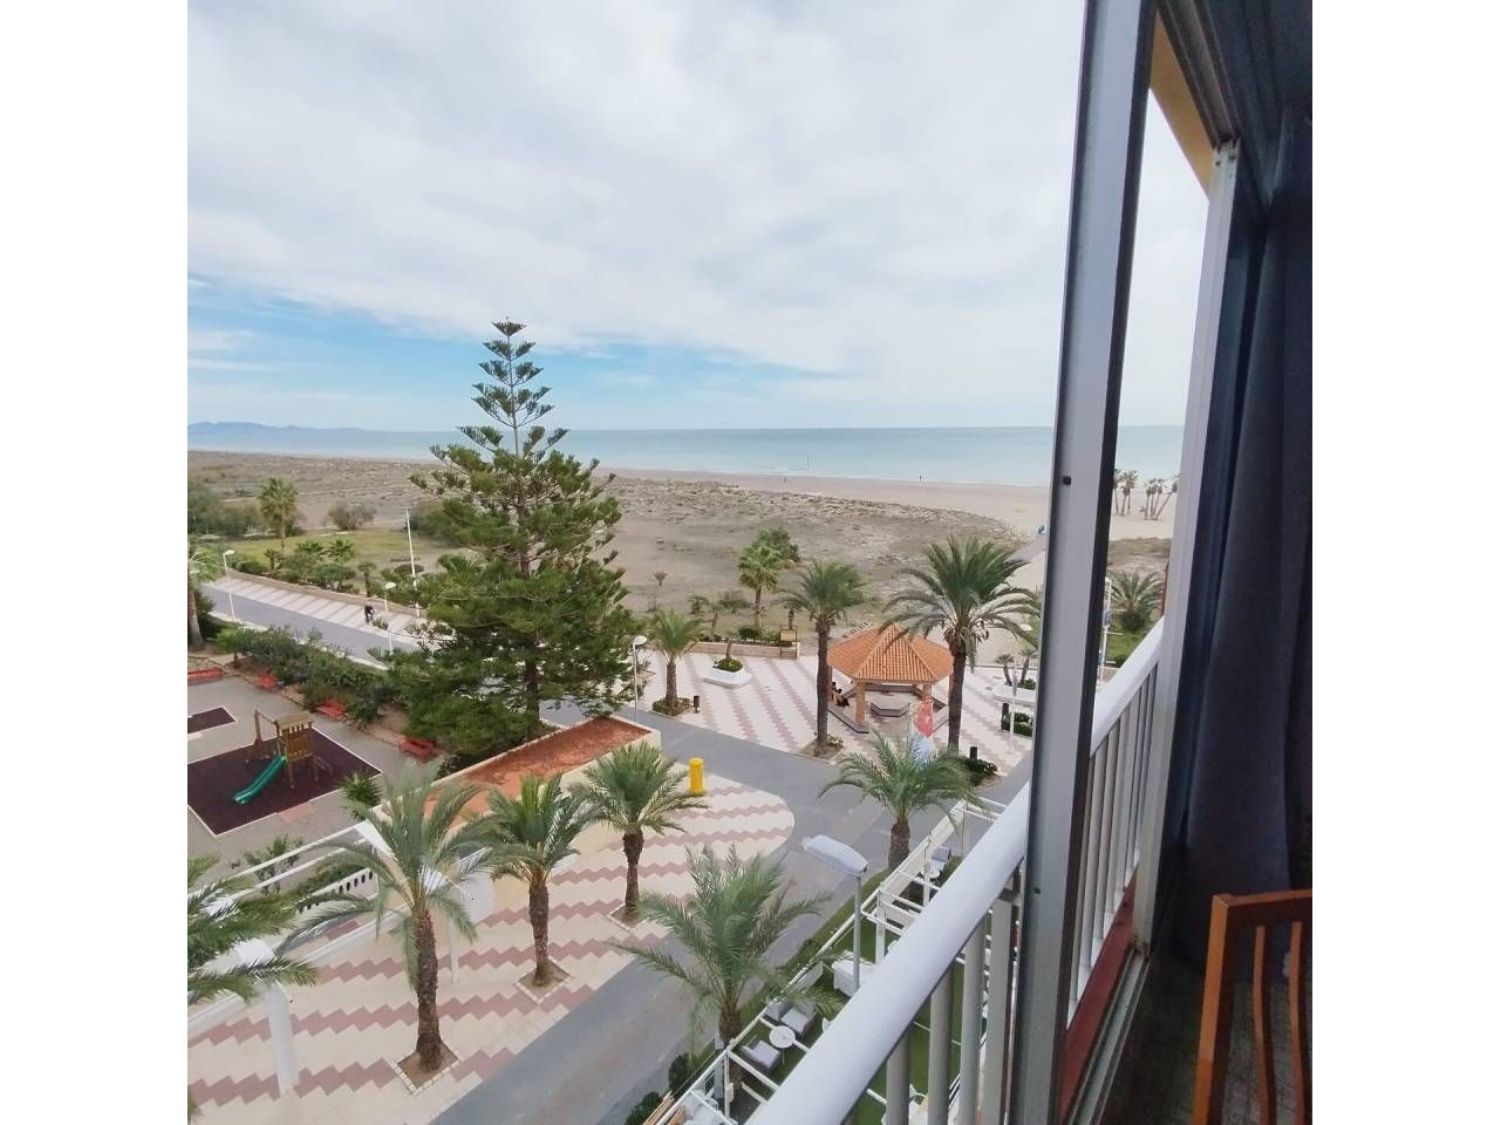 Apartment for sale on the seafront in Canet d'En Berenguer